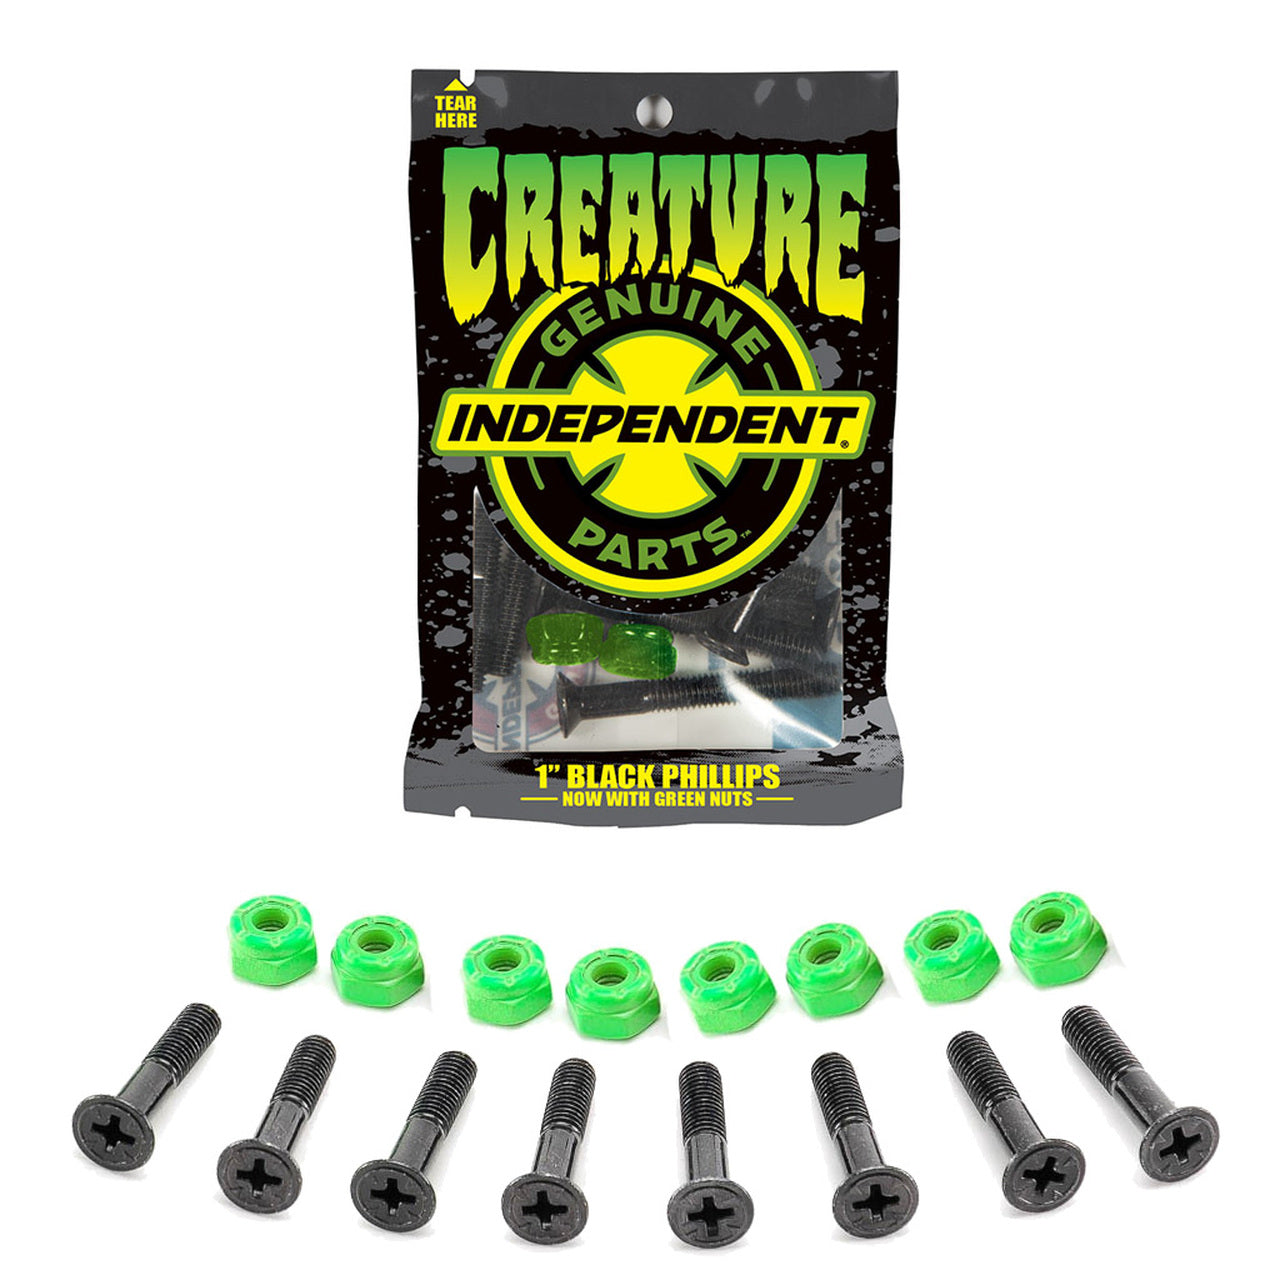 Independent x Creature 1" Phillips Bolts